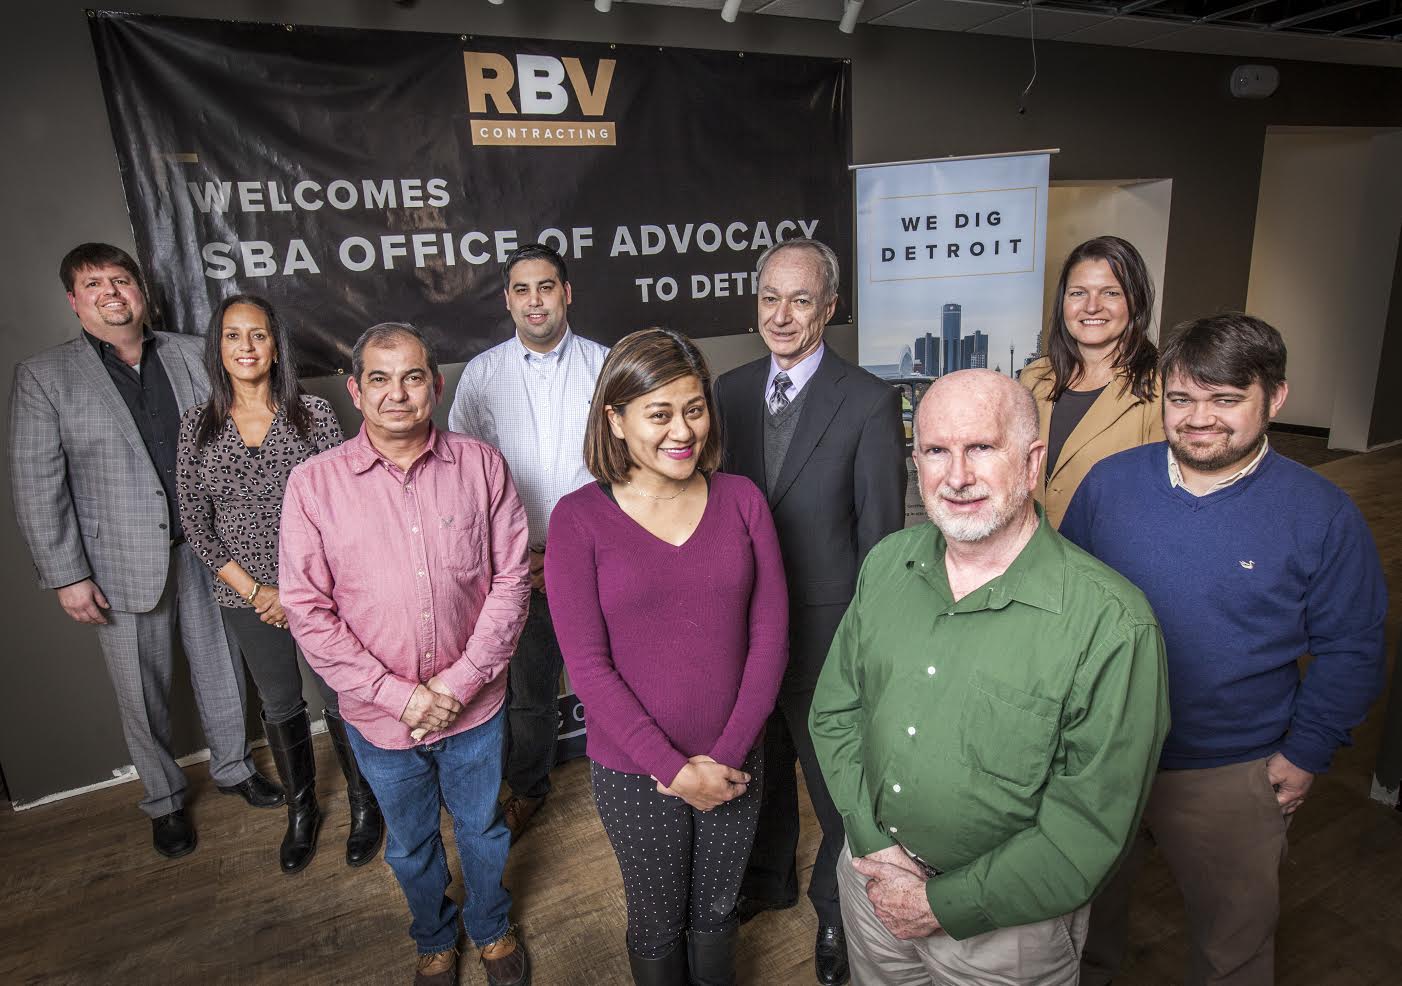 Advocacy visited the headquarters of RBV Contracting, a construction company that is rebuilding Detroit, Michigan one building at a time. Photo courtesy of RBV’s photographer, Diane Weiss.